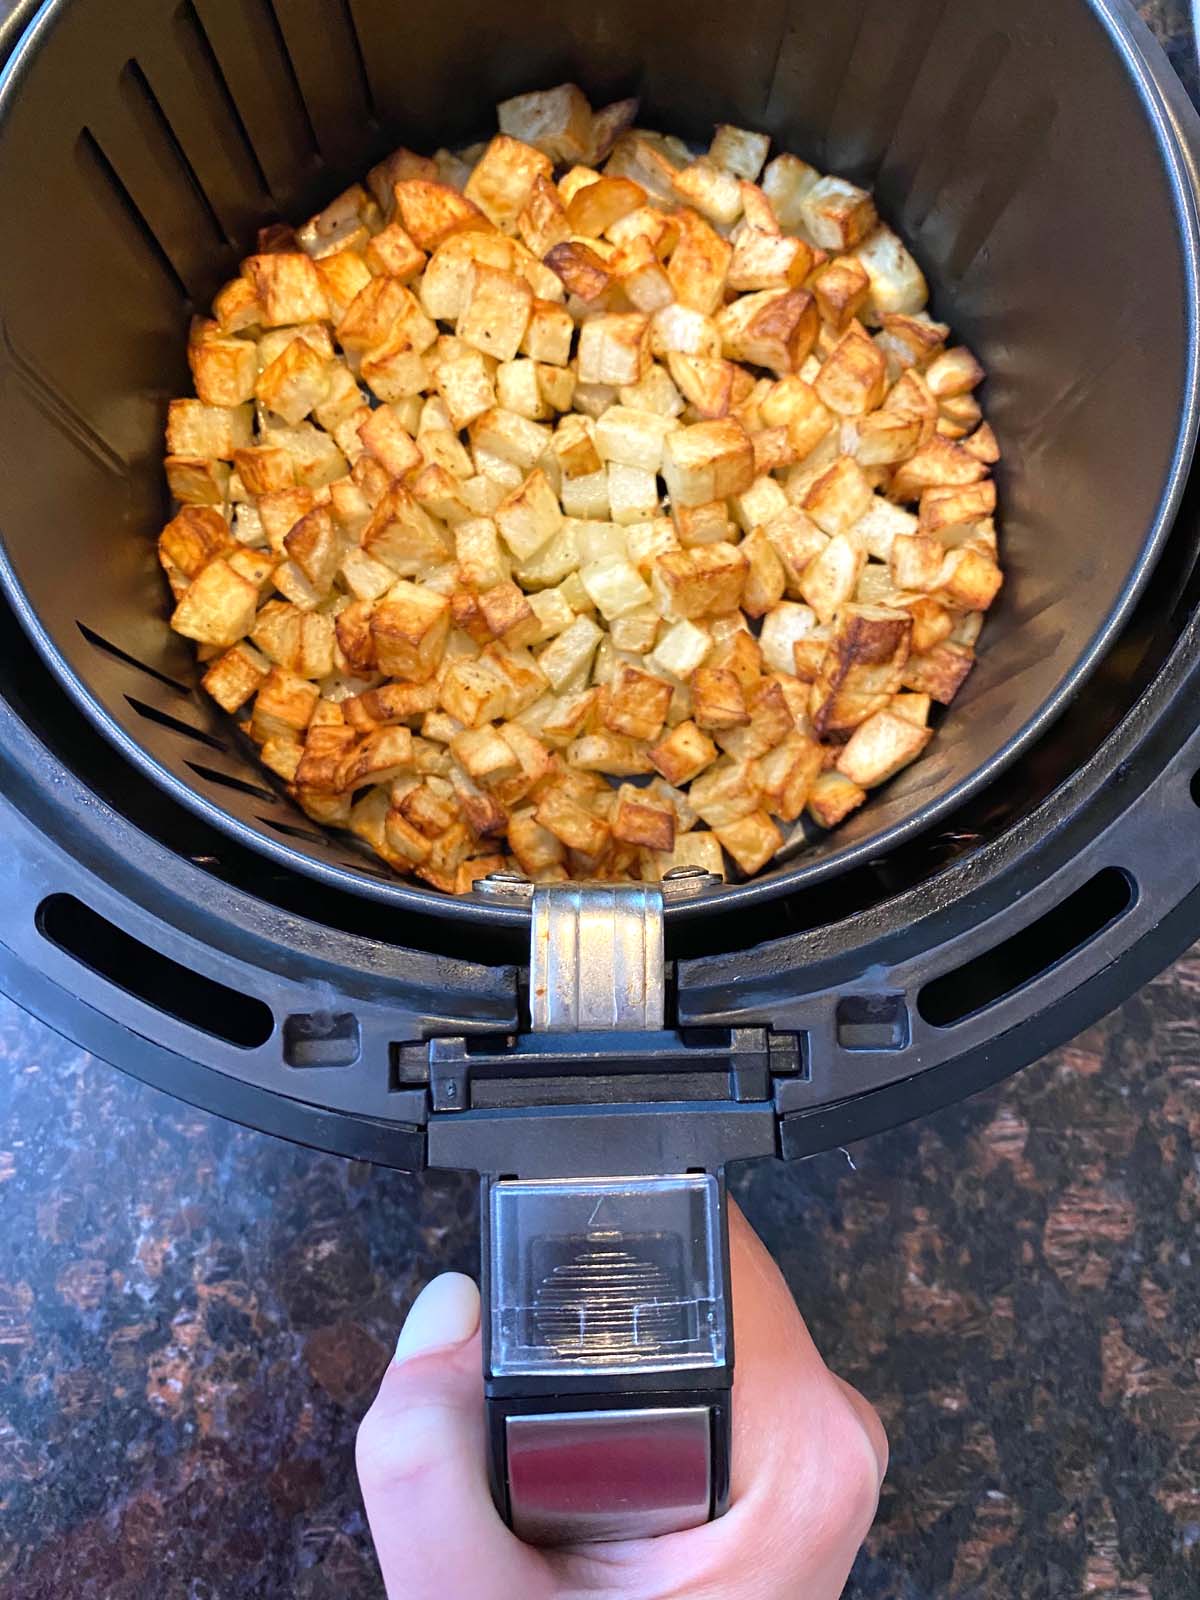 Cooked diced potatoes in an air fryer.